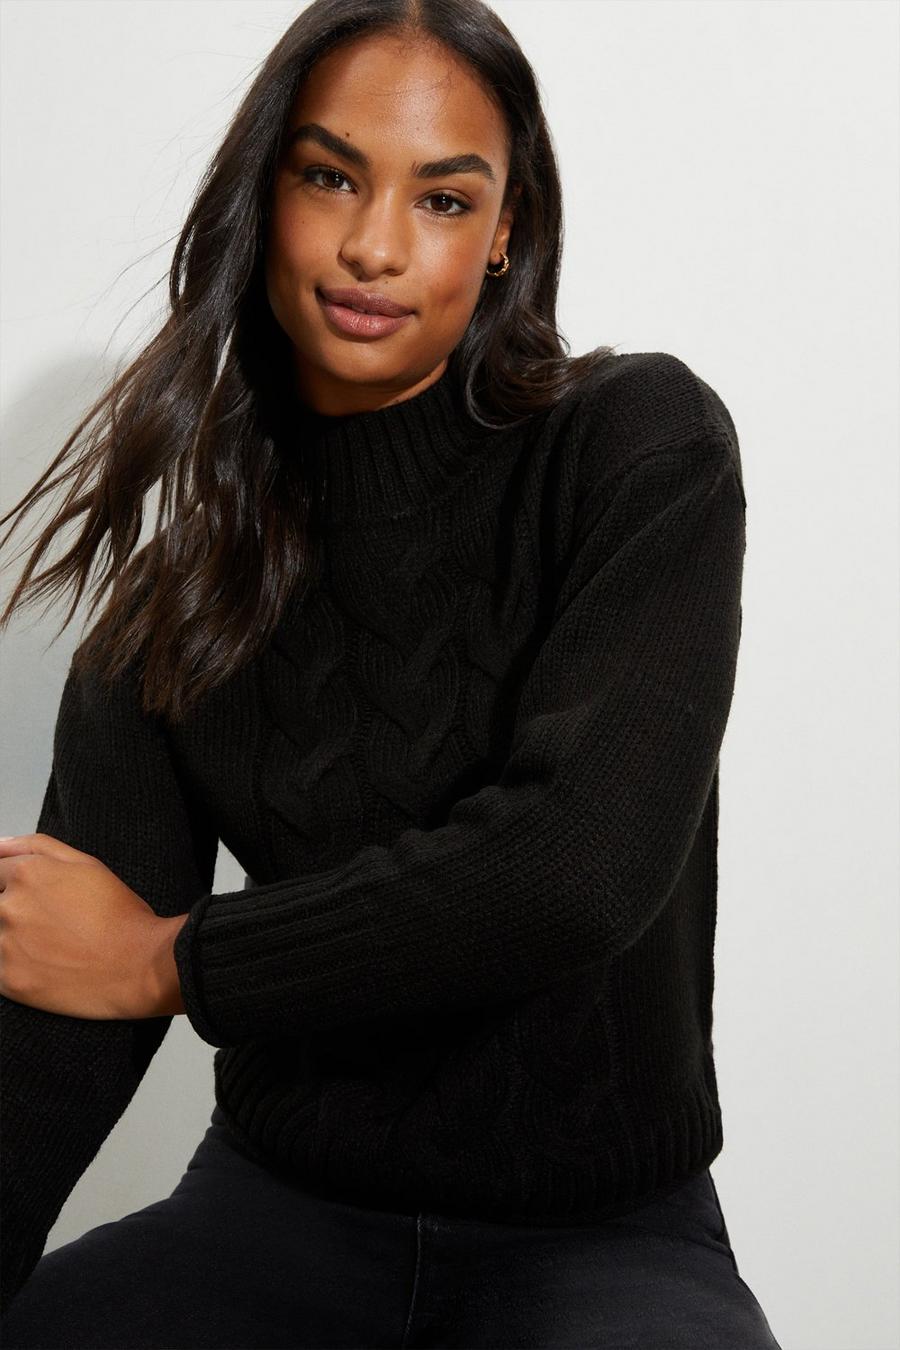 Women's Knitwear | Jumpers & Chunky Knit Cardigans | Dorothy Perkins UK